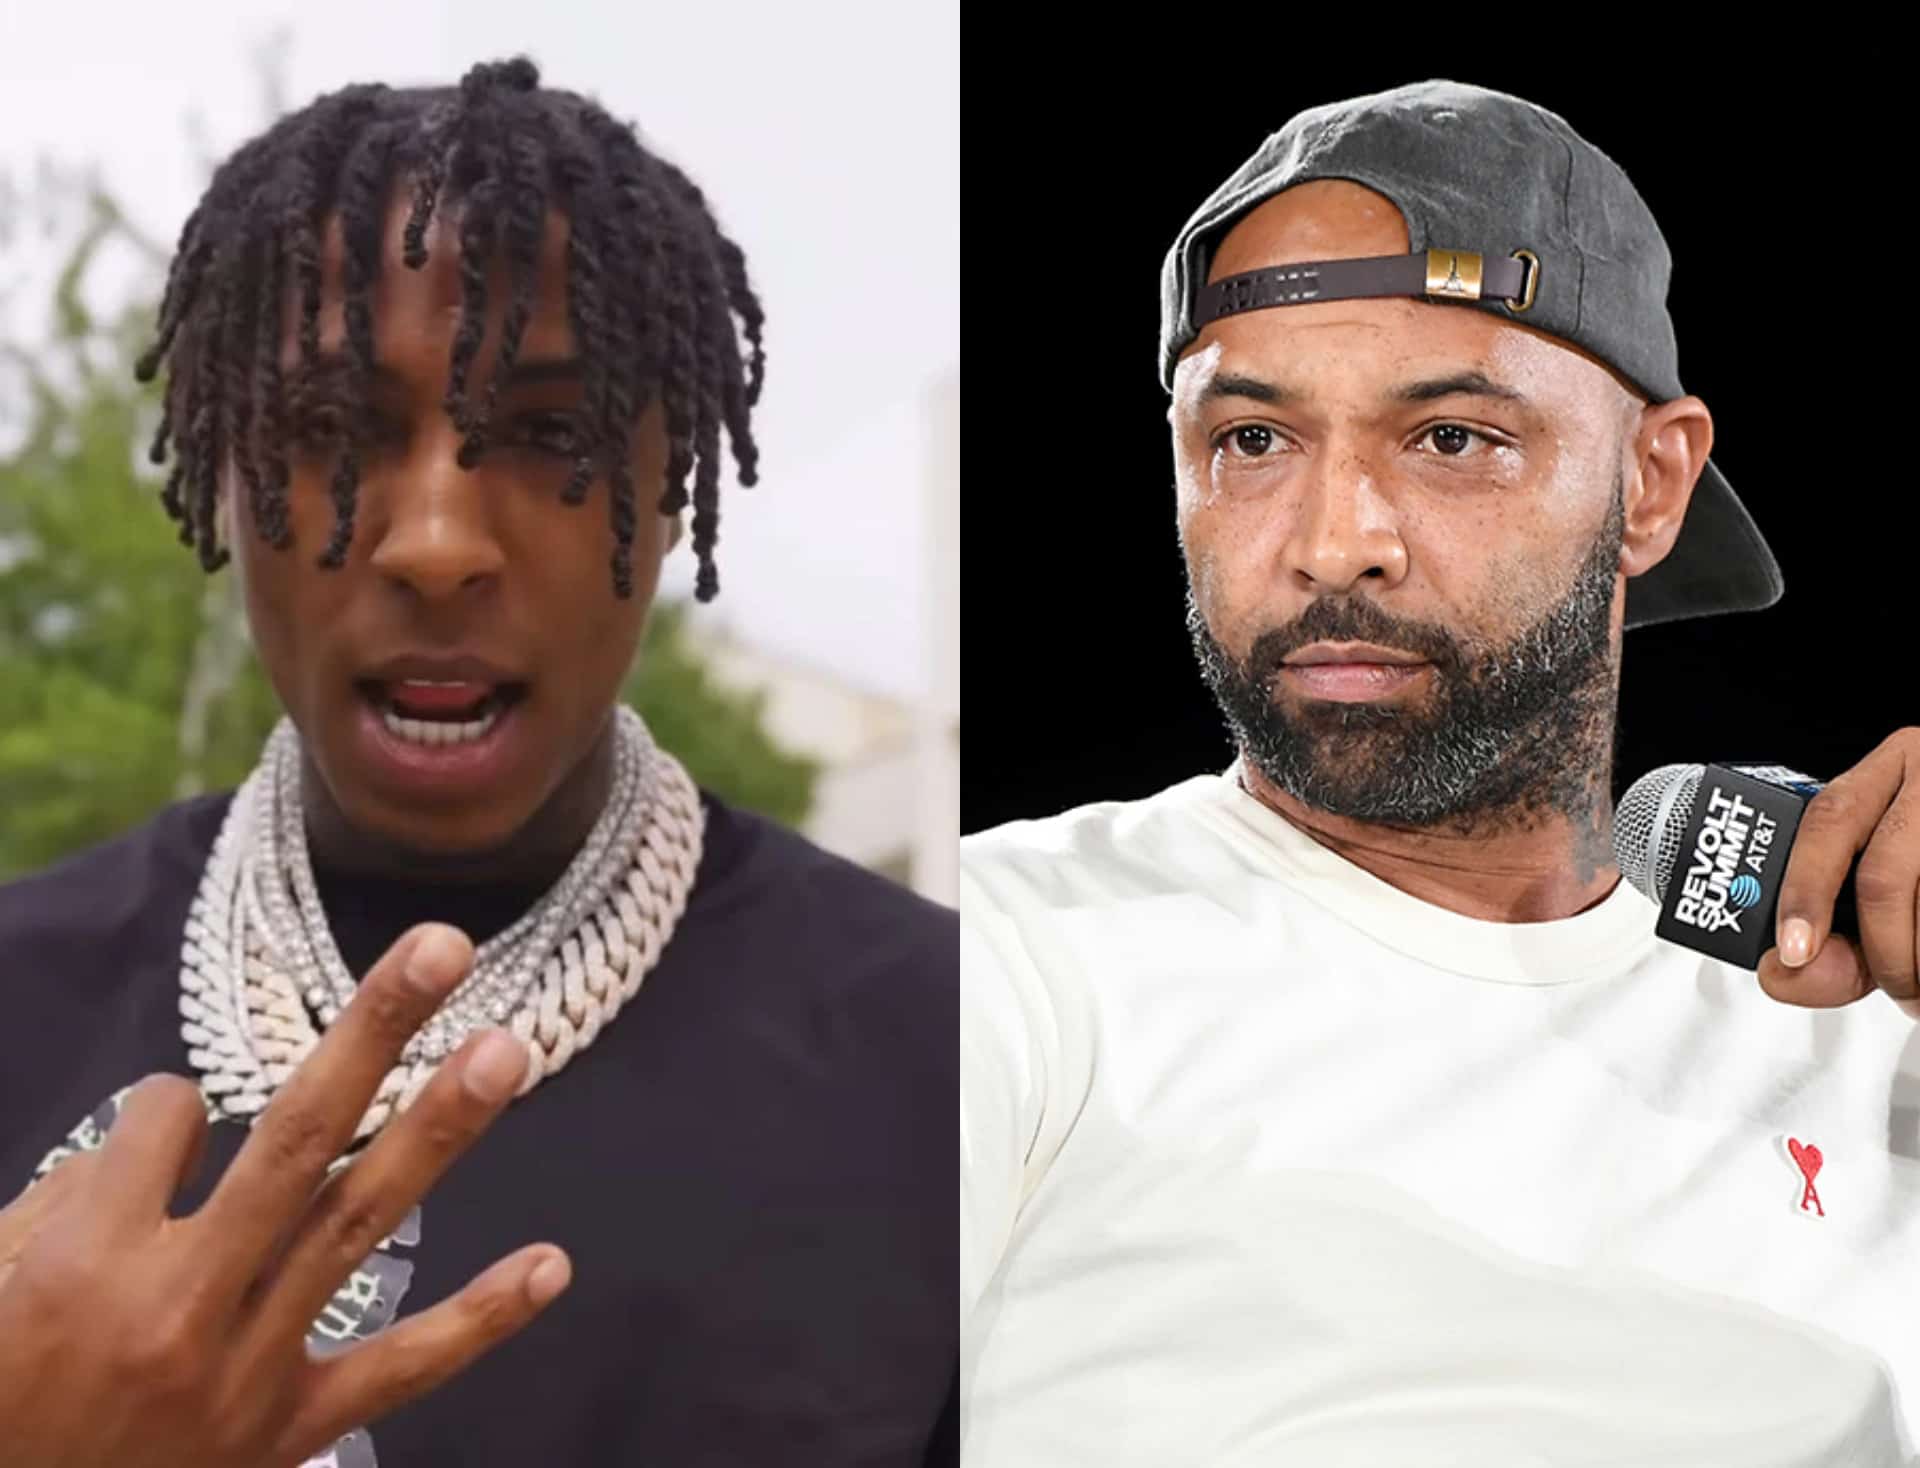 Joe Budden Issues Apology To NBA Youngboy For Trashing Him & His Music